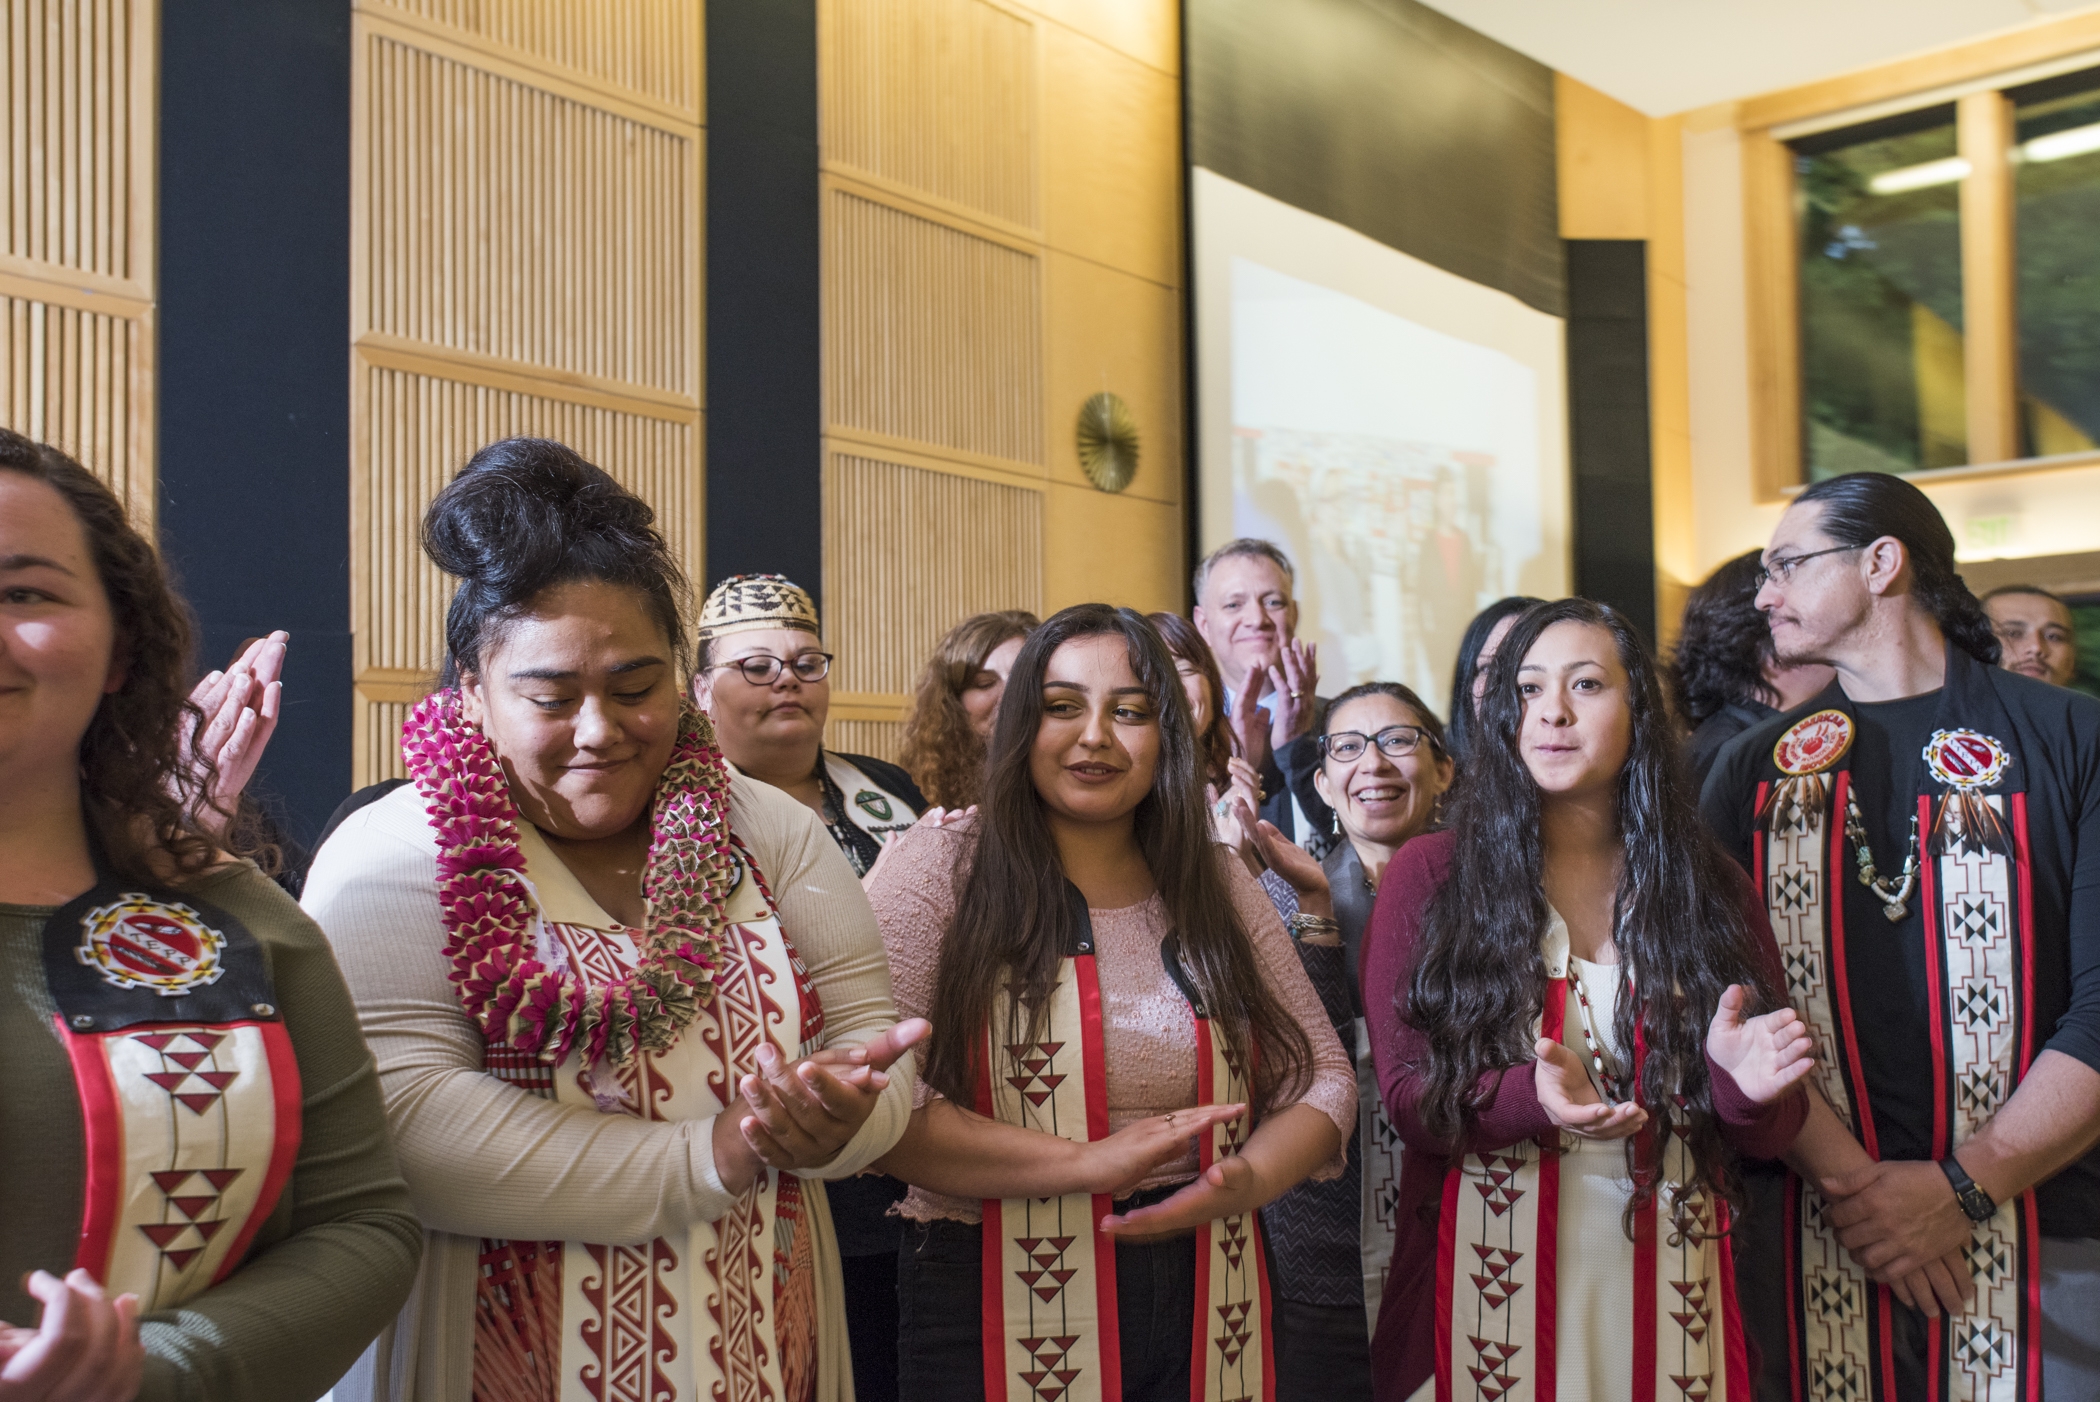 Native American students at Cal Poly Humboldt